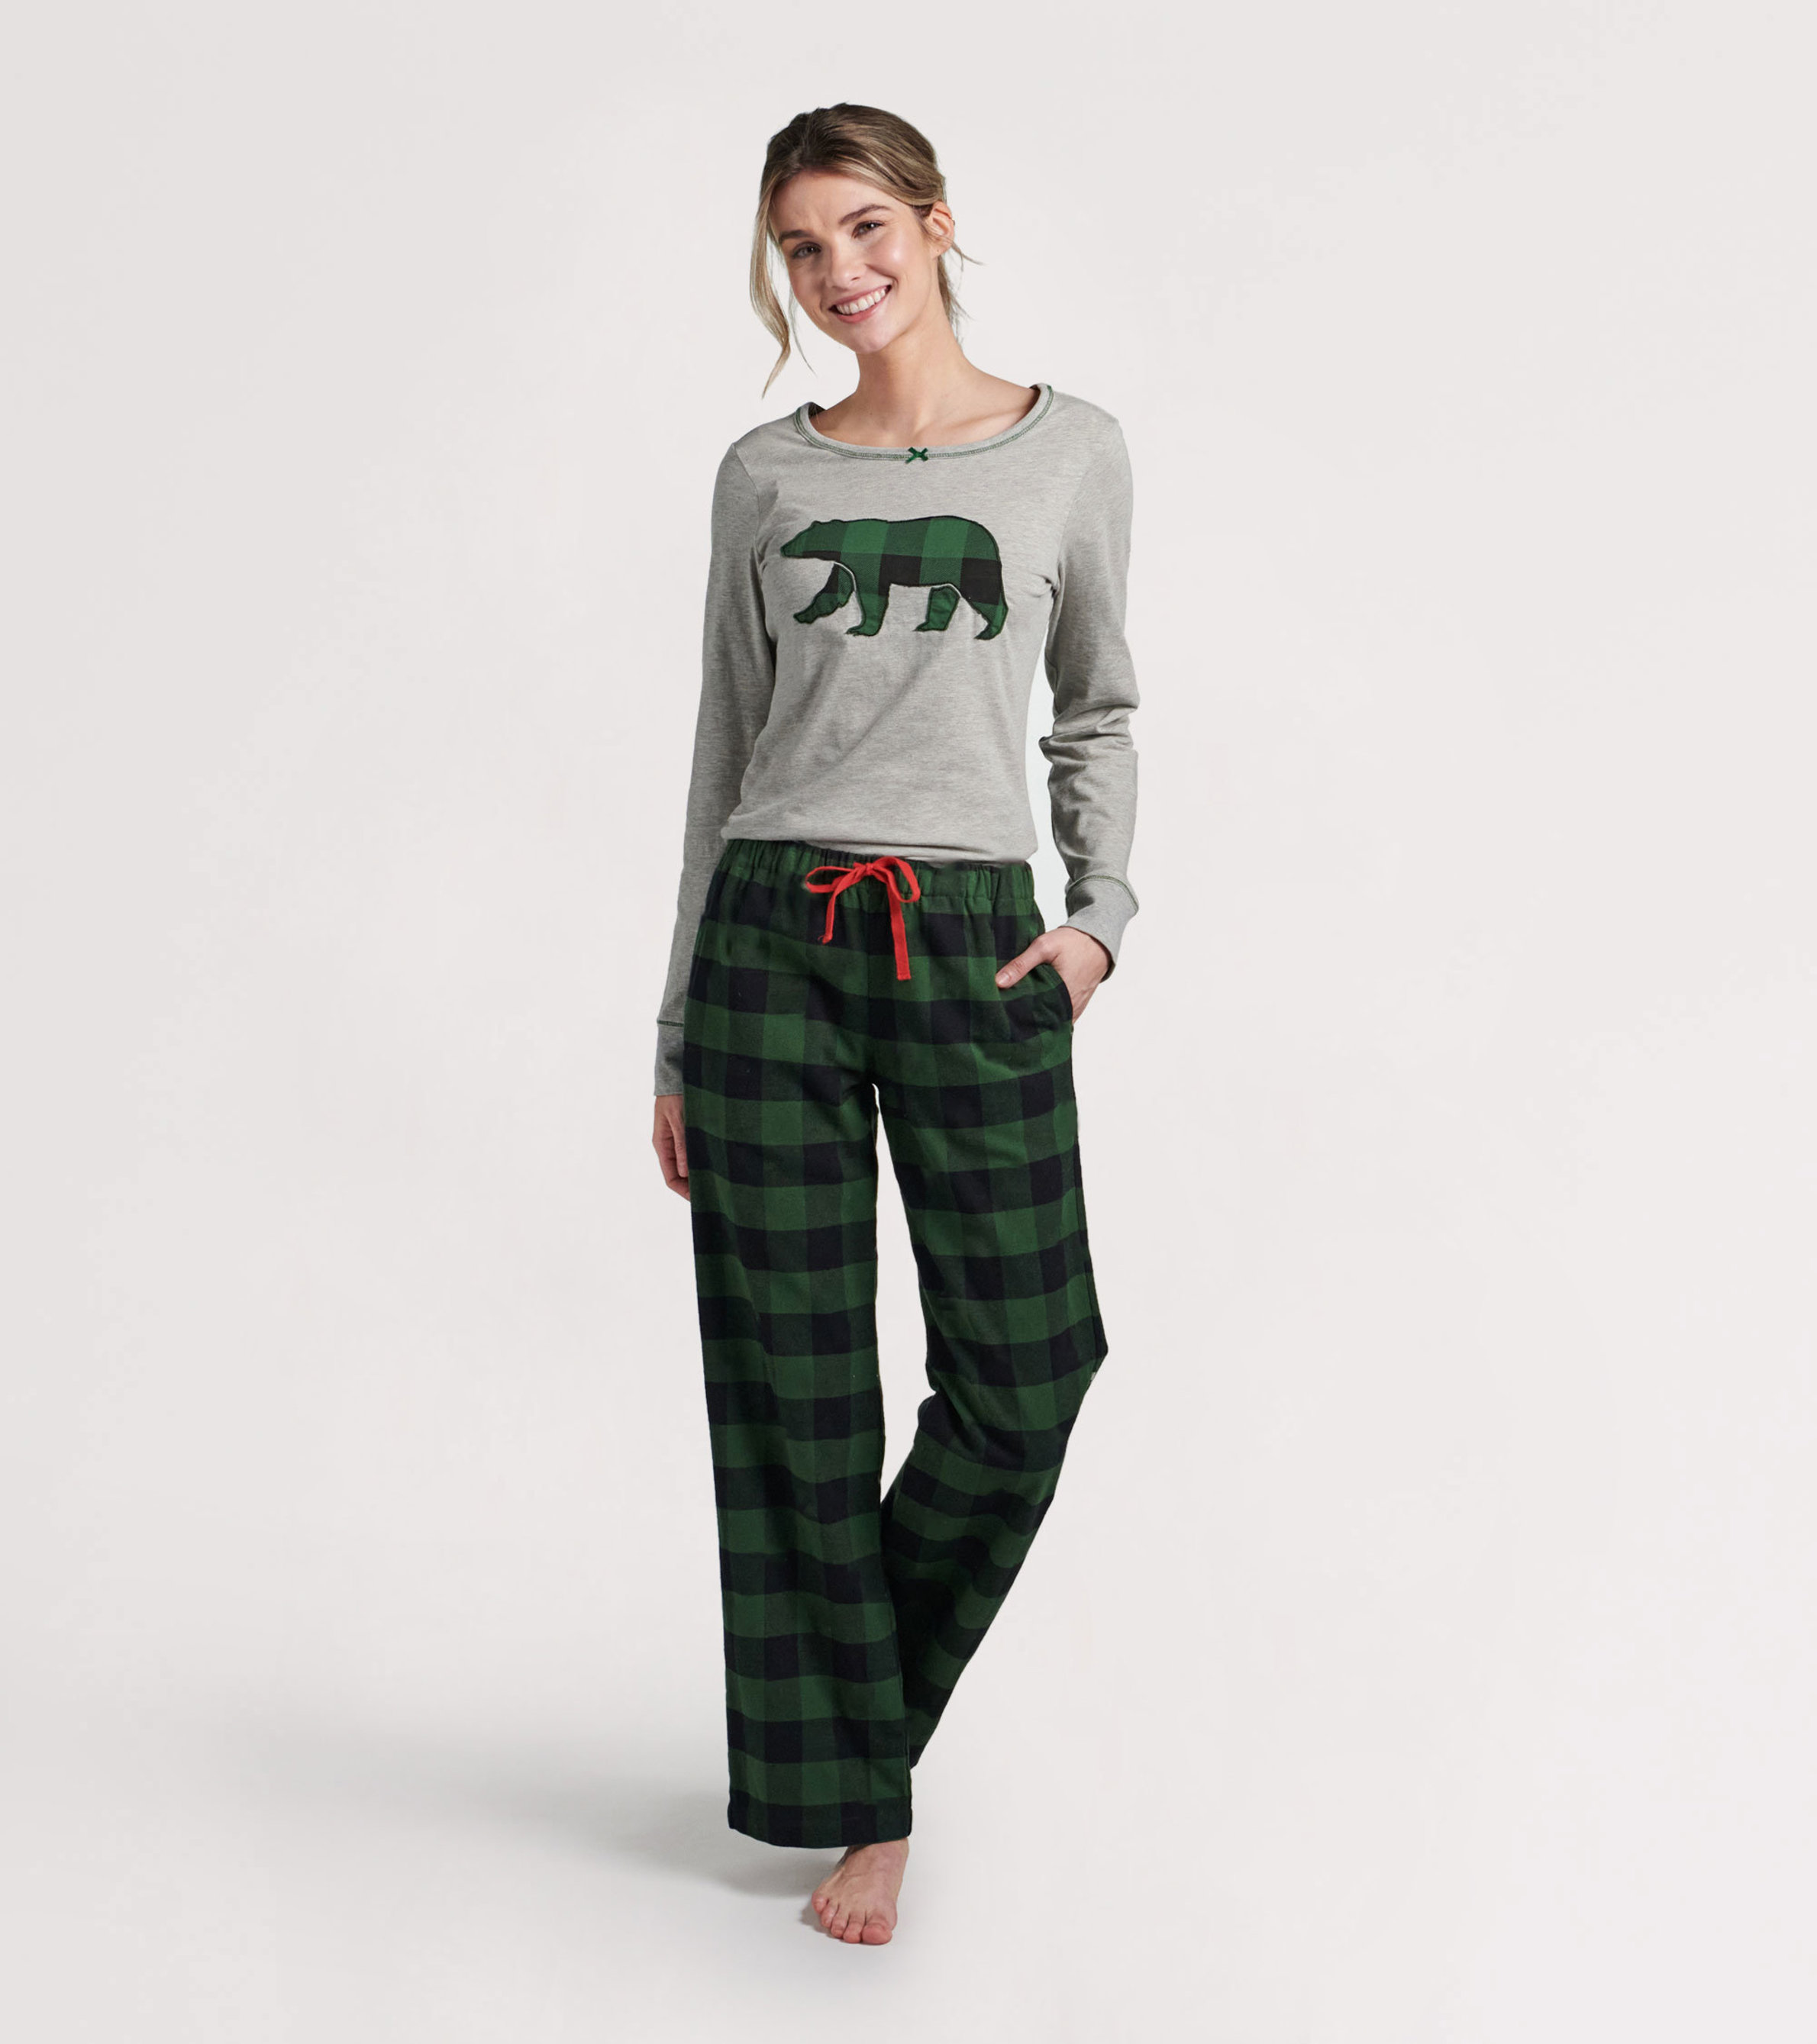 https://cdn.littlebluehouse.com/product_images/forest-green-plaid-womens-flannel-pajama-pants/PA8BFLO002_A_jpg/pdp_zoom.jpg?c=1664833965&locale=en